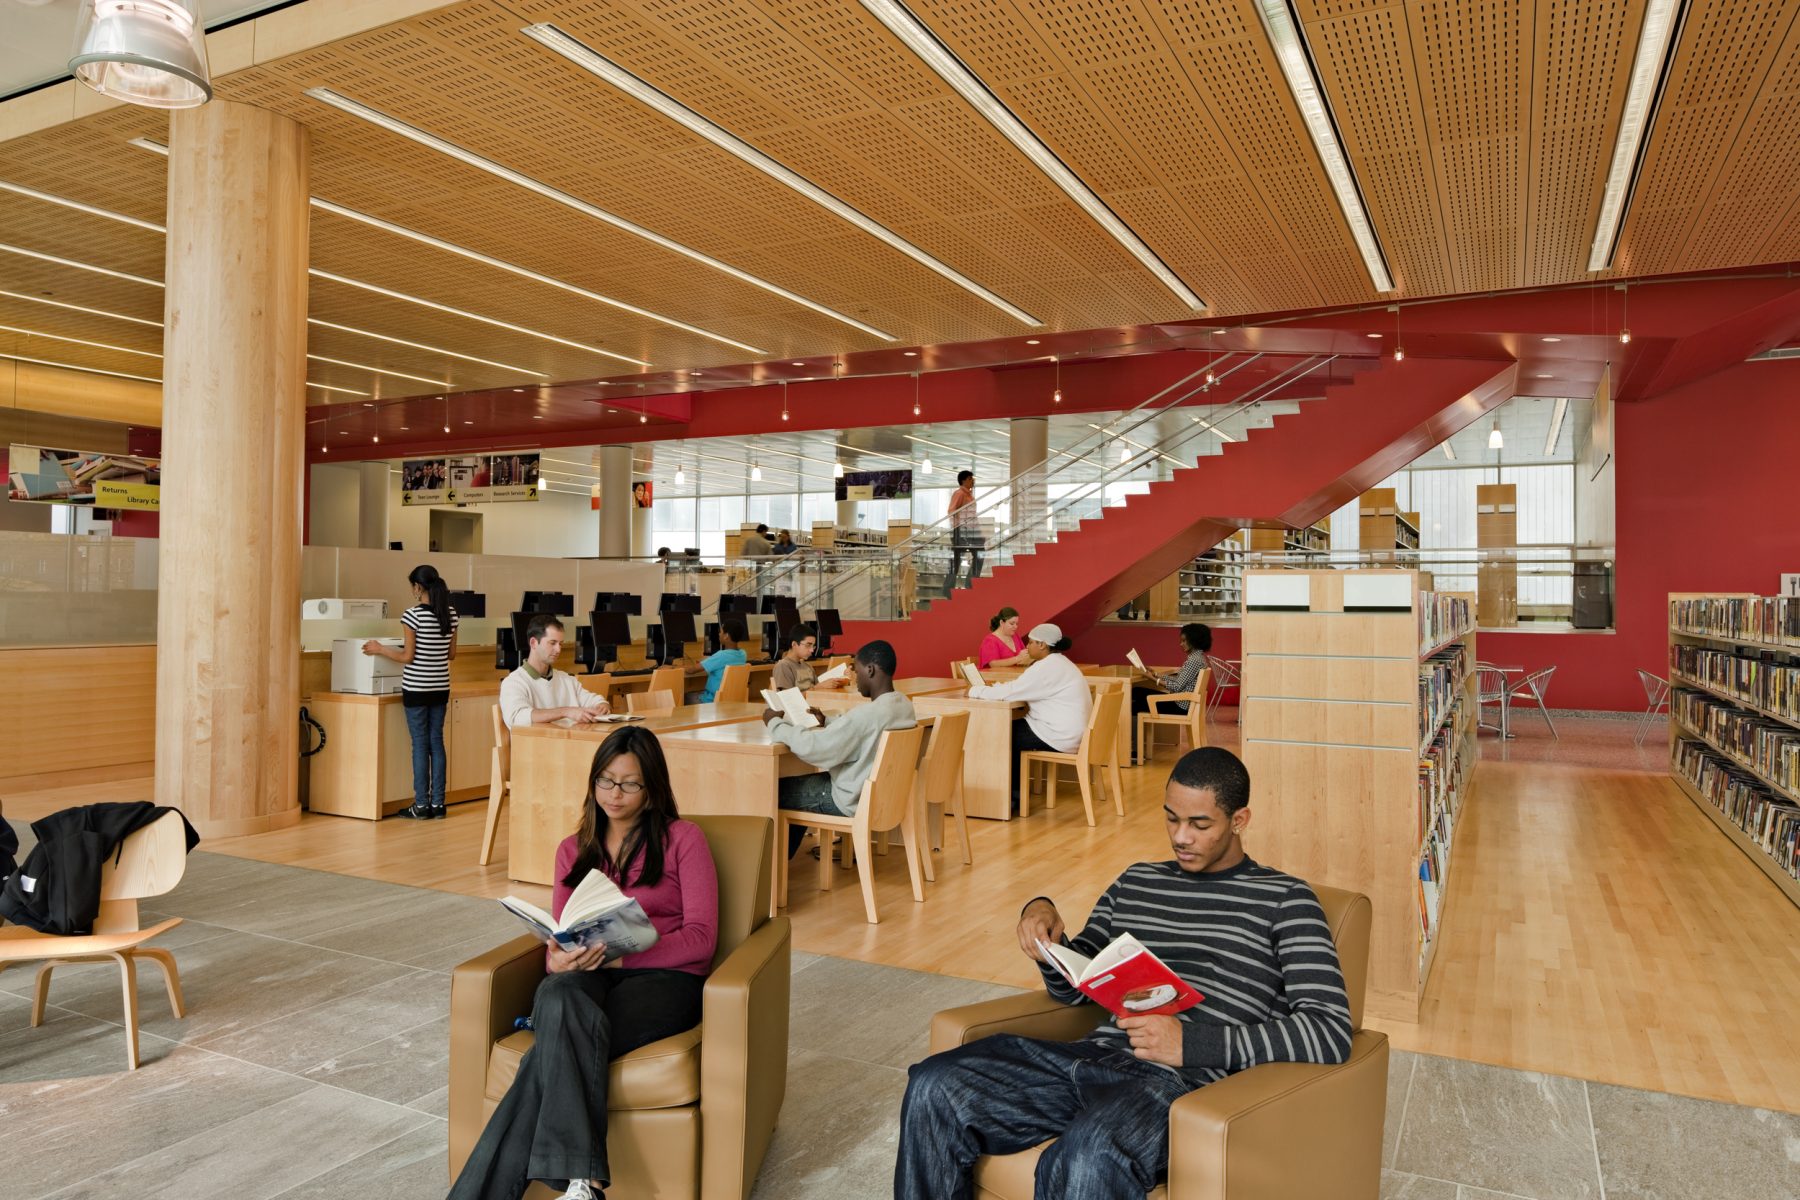 Cambridge Public Library Interior with guests reading at lounge chairs and tables